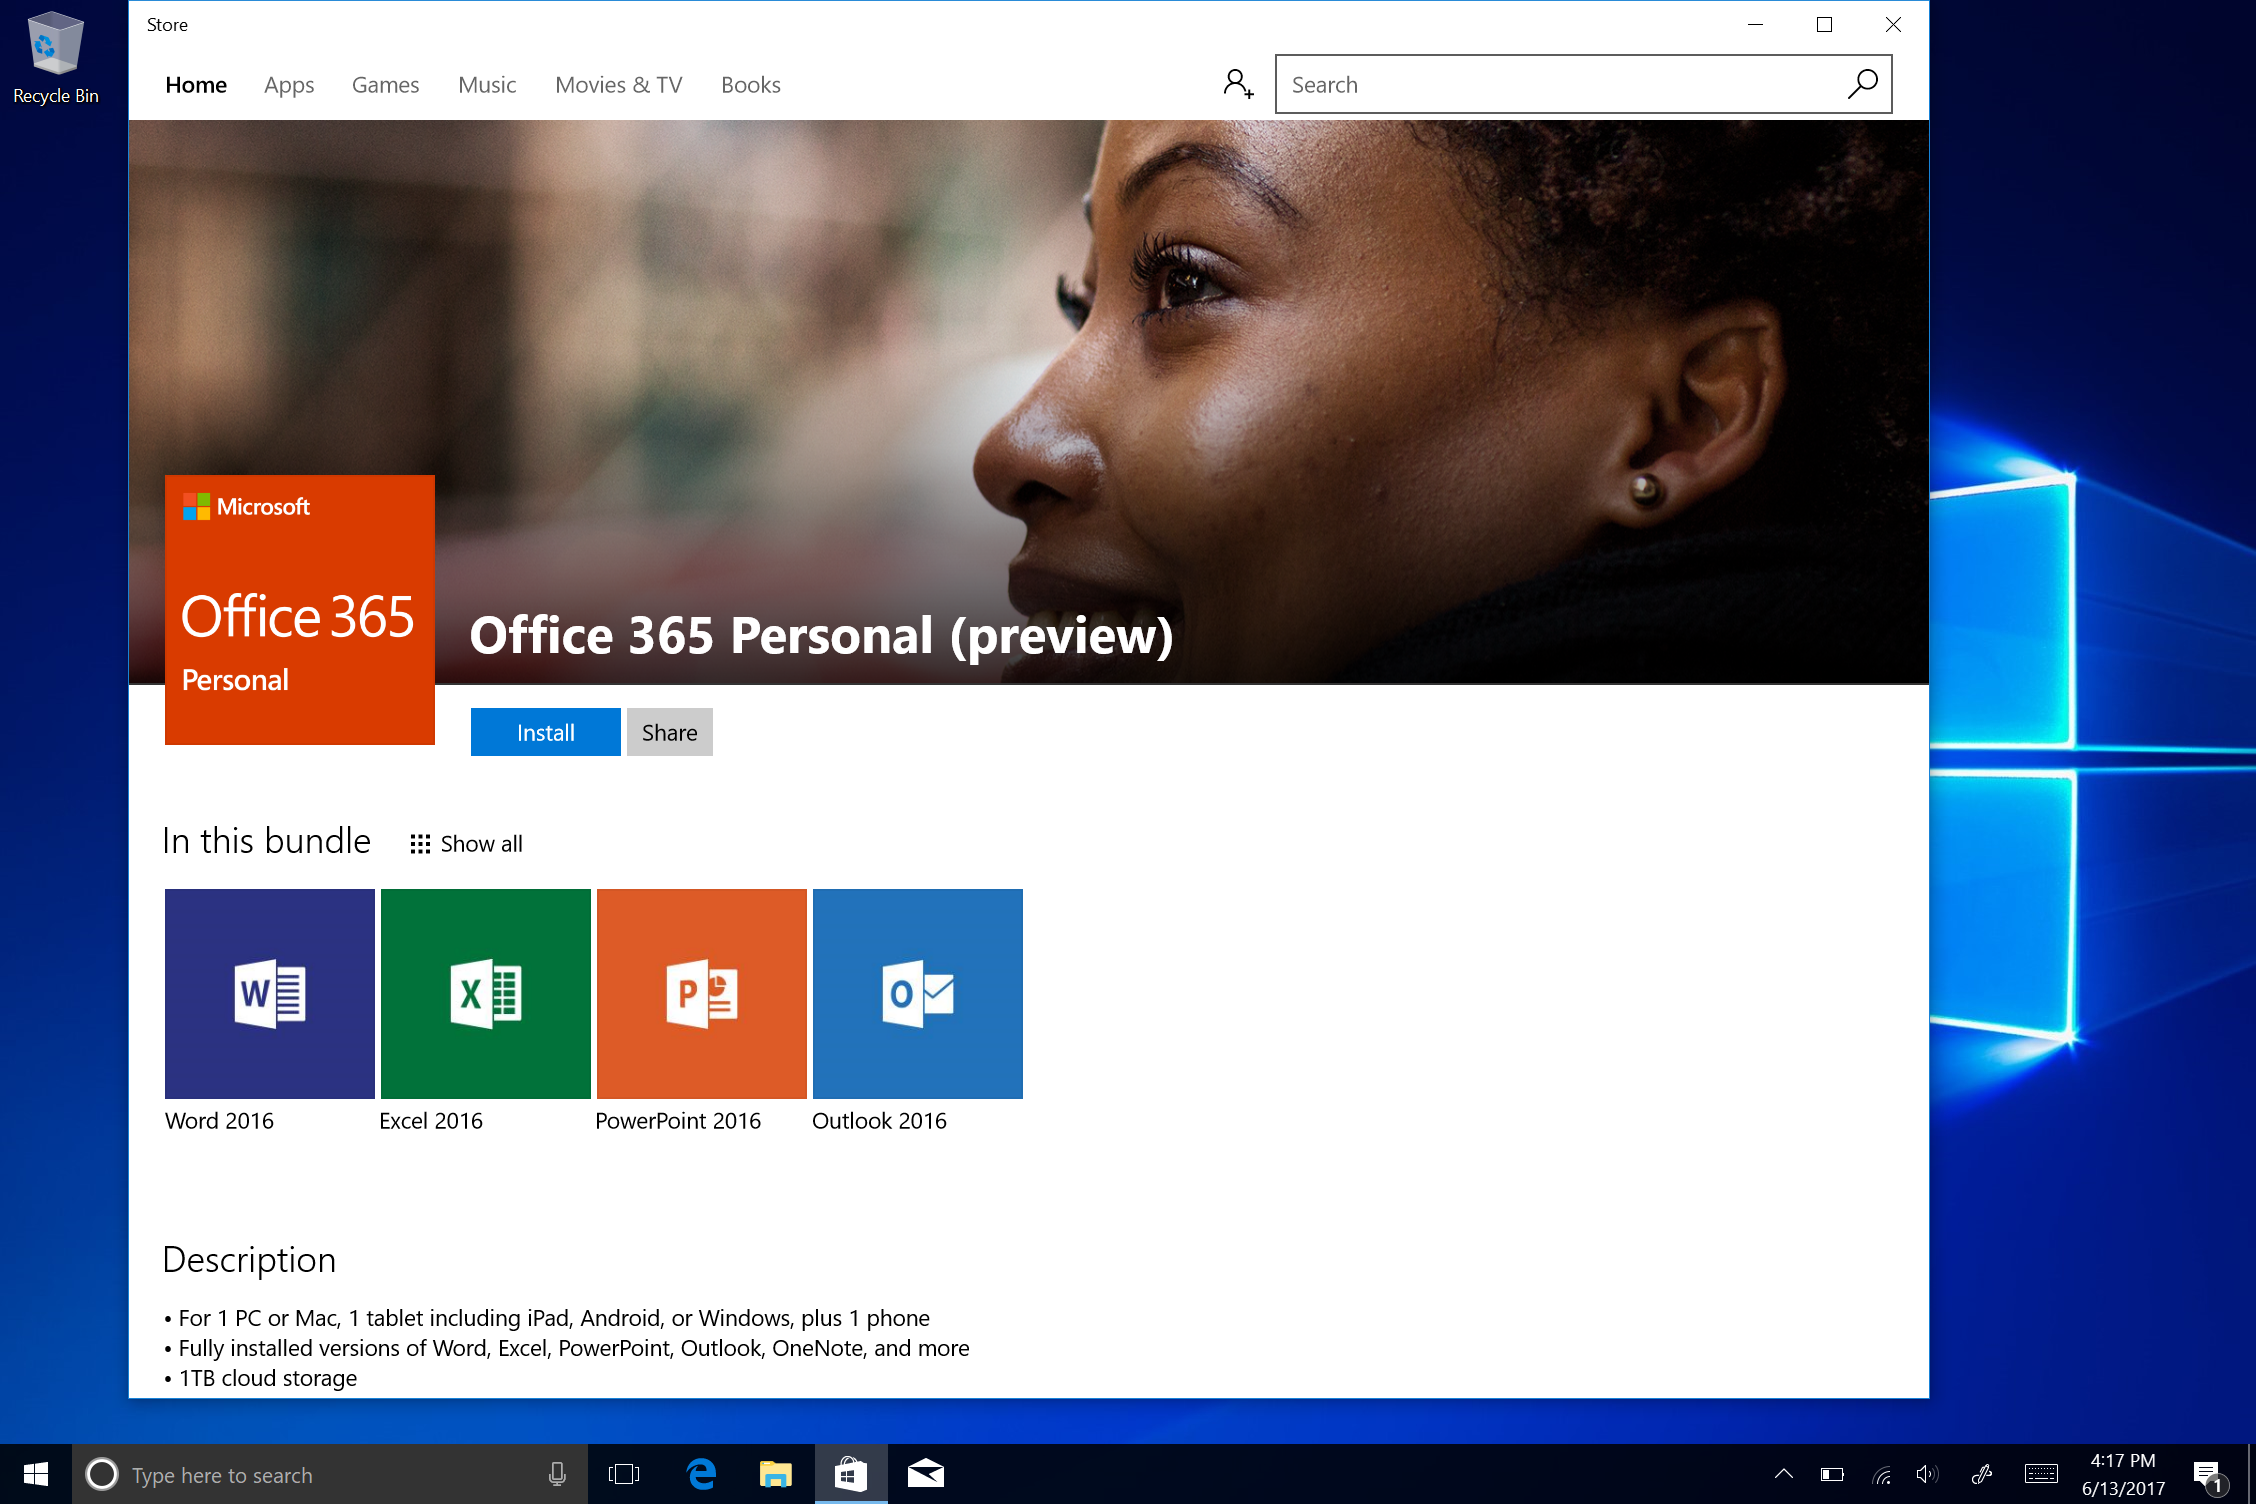 Office 365 Personal available in preview in the Windows Store for Windows 10 S